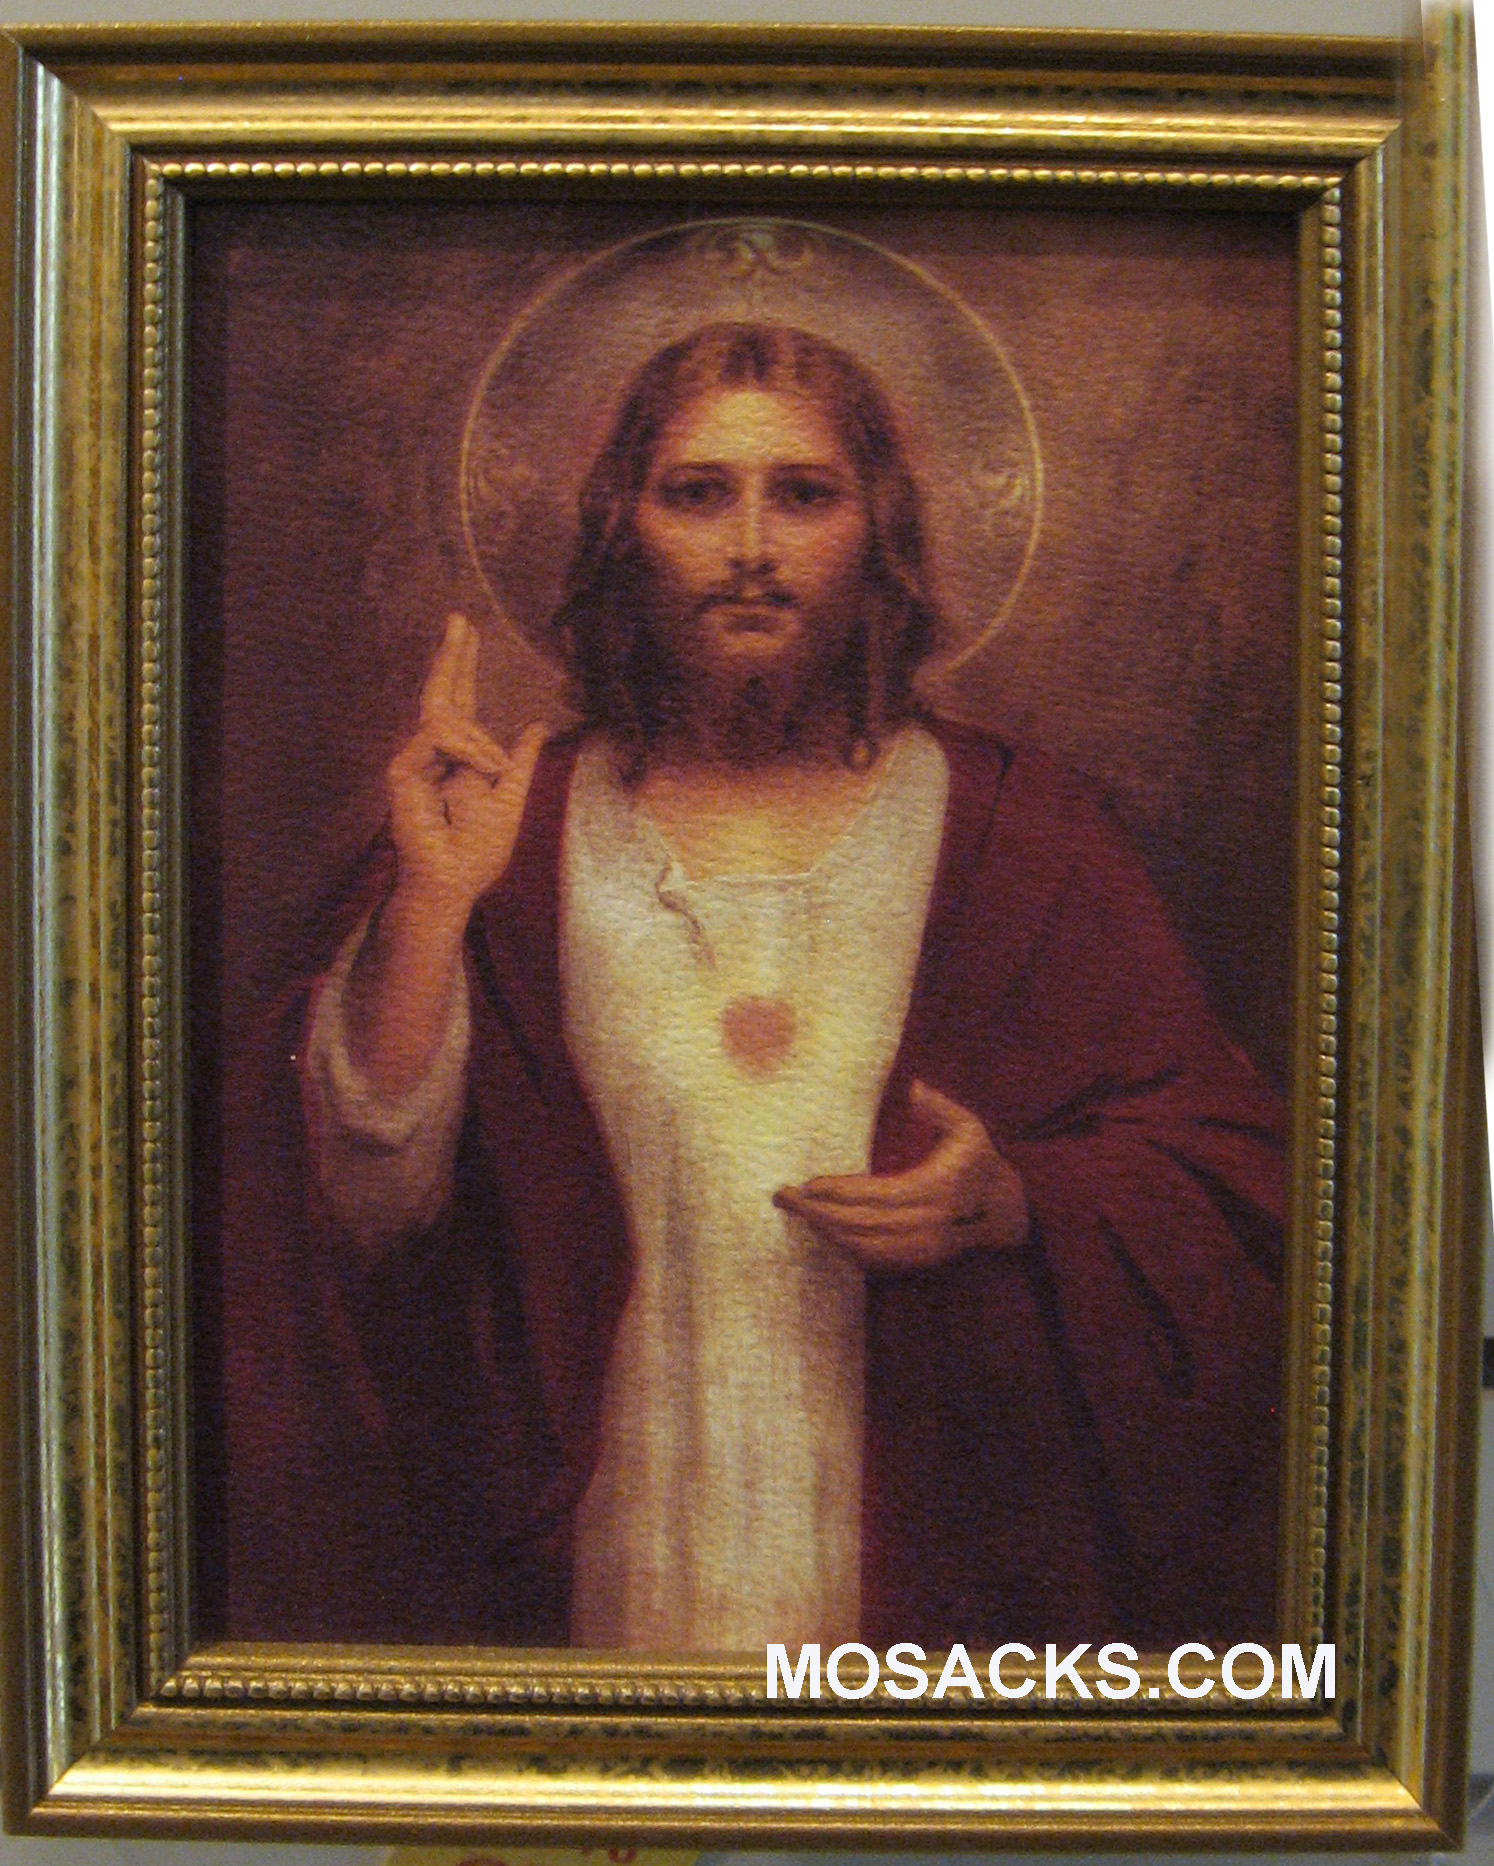 5" x 7” Sacred Heart of Jesus with Halo print in Gold Leaf Frame 7700-5710  Overall size 6.5" x 8.5".